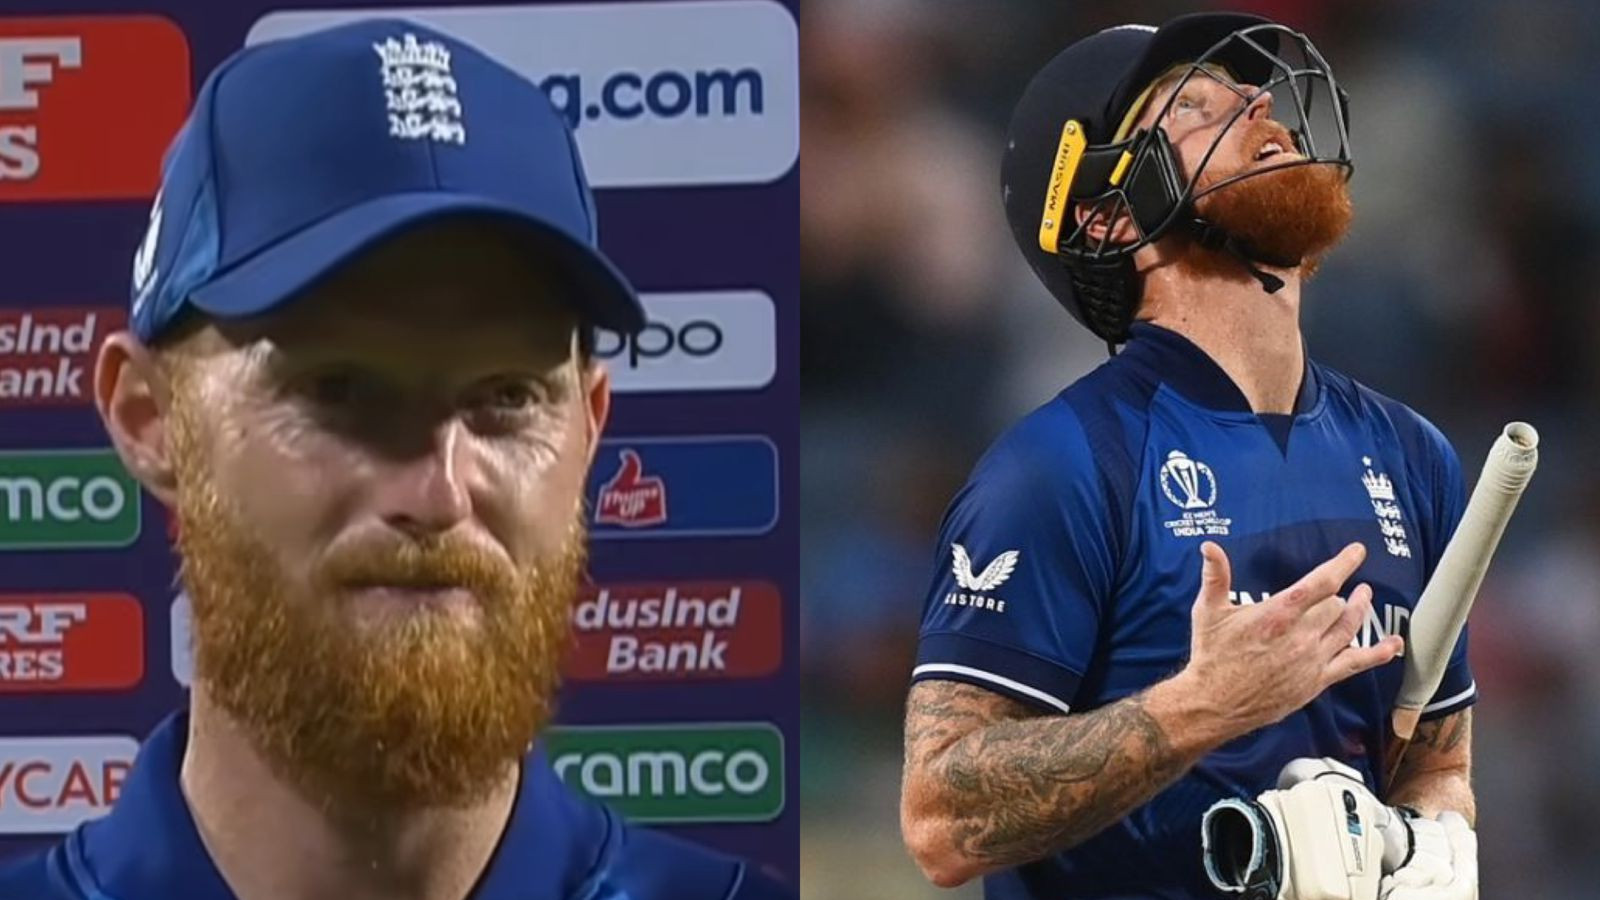 CWC 2023: WATCH - “No, don't leave anyone hanging,” Ben Stokes rubbishes rumors of him returning home early